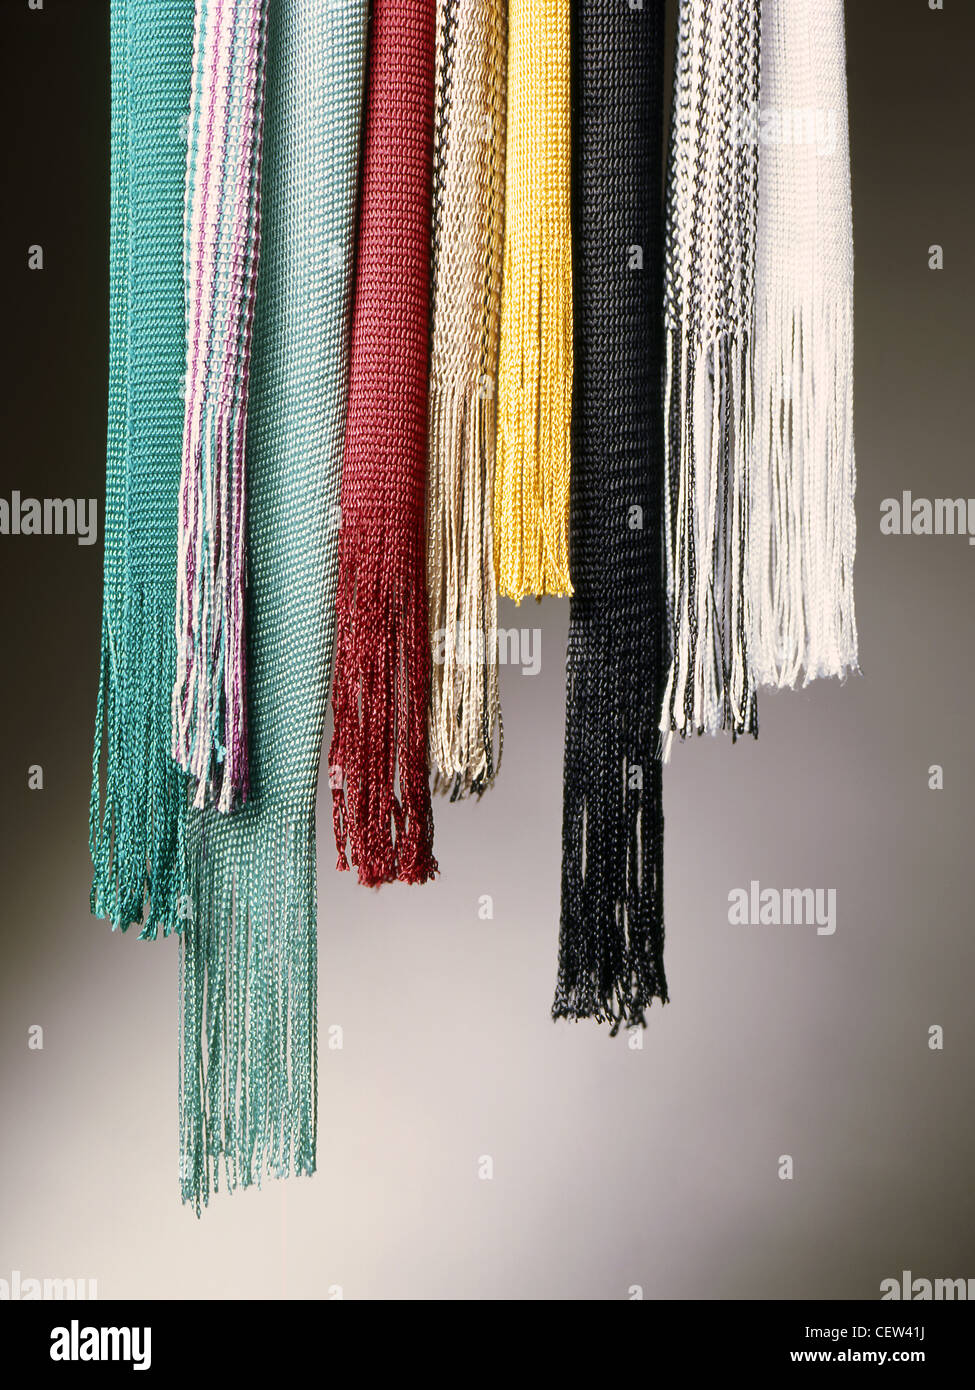 A still life shot of colourful wool scarves lined up on a salmon coloured background Stock Photo